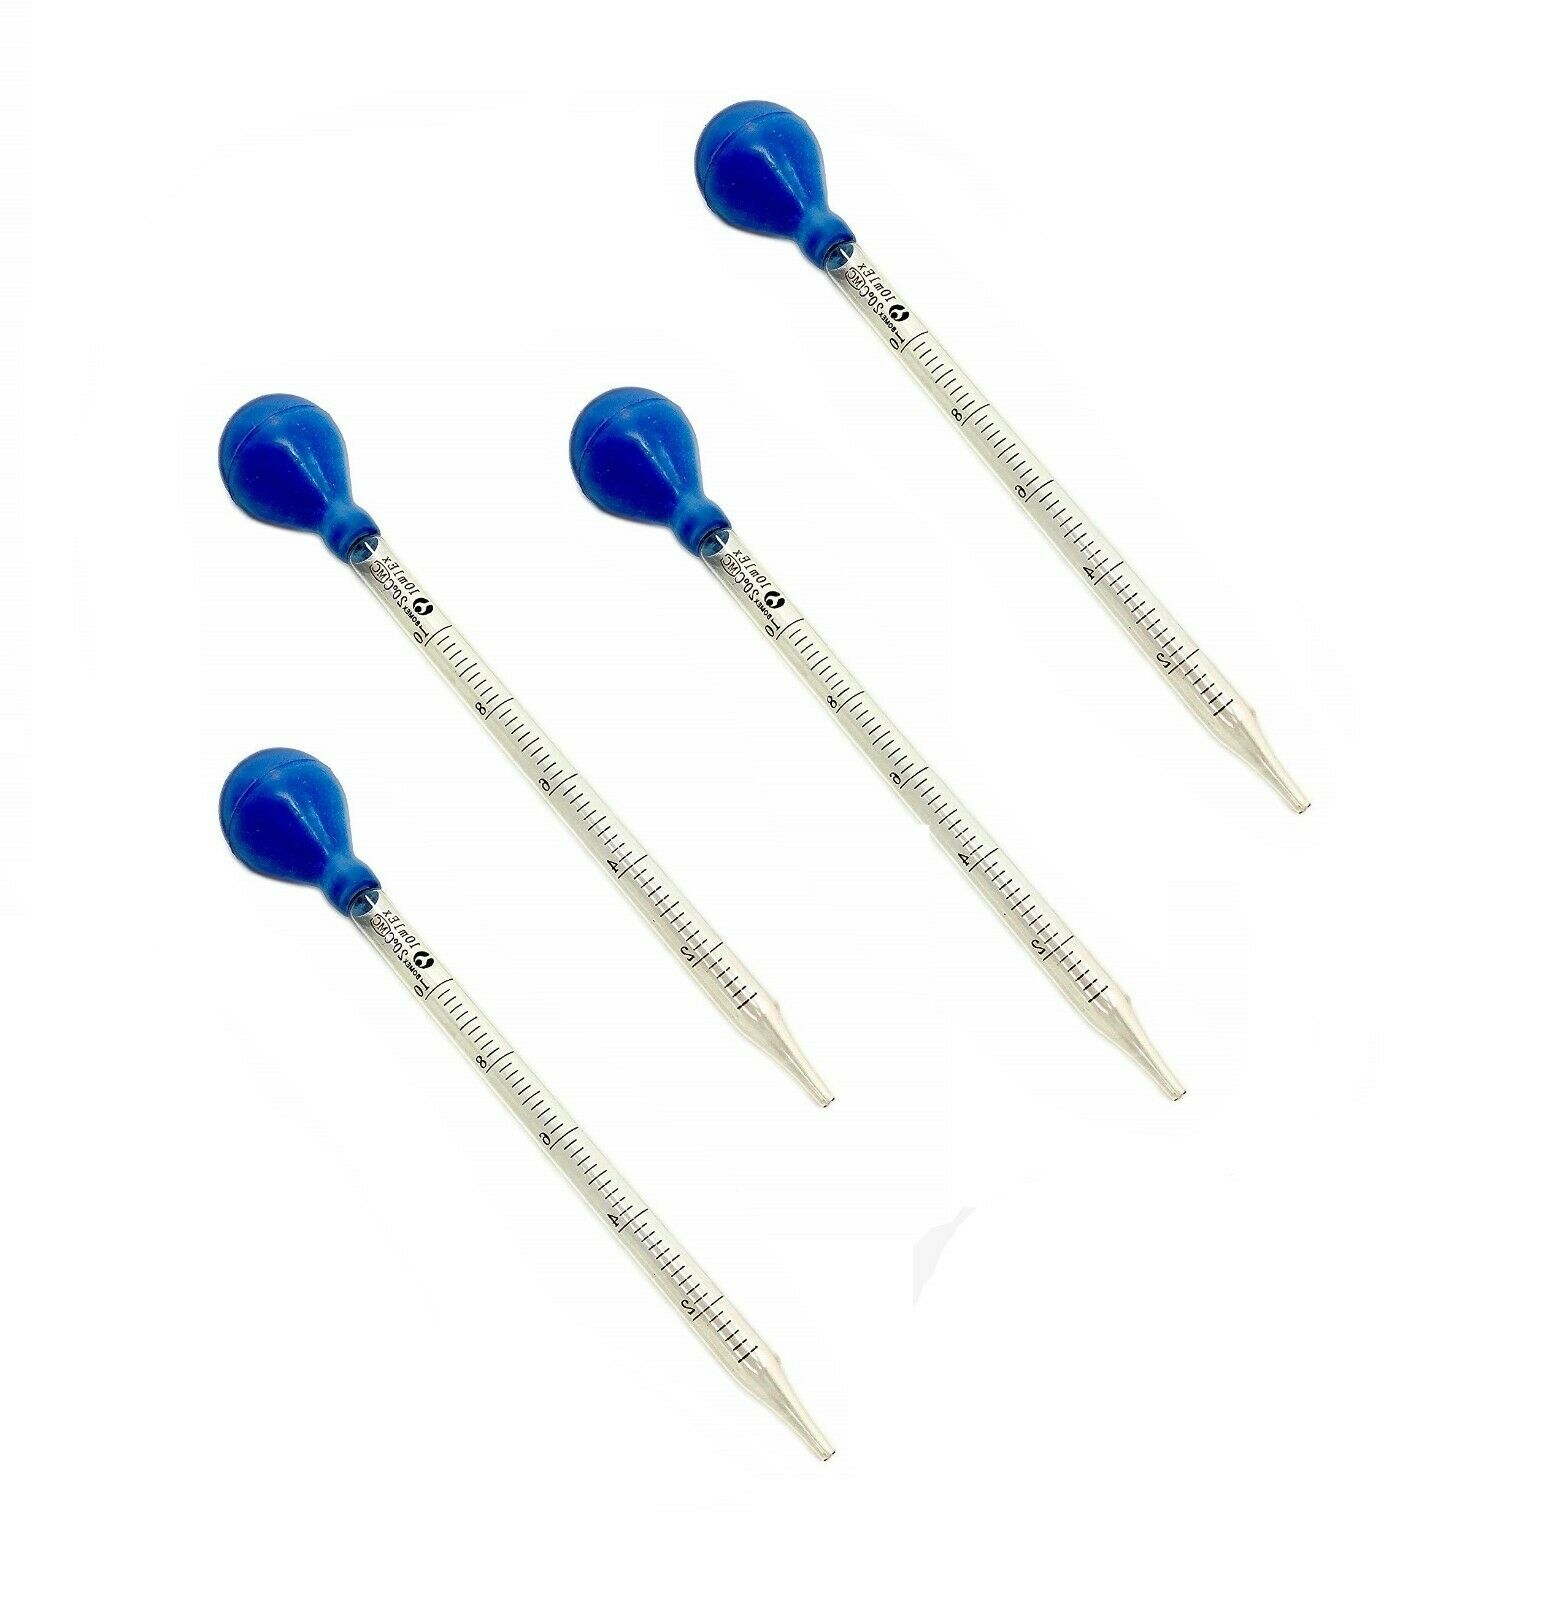 Glass Dropper Graduated Transfer Pipette With Rubber Bulb, 10ml - Pack Of 4